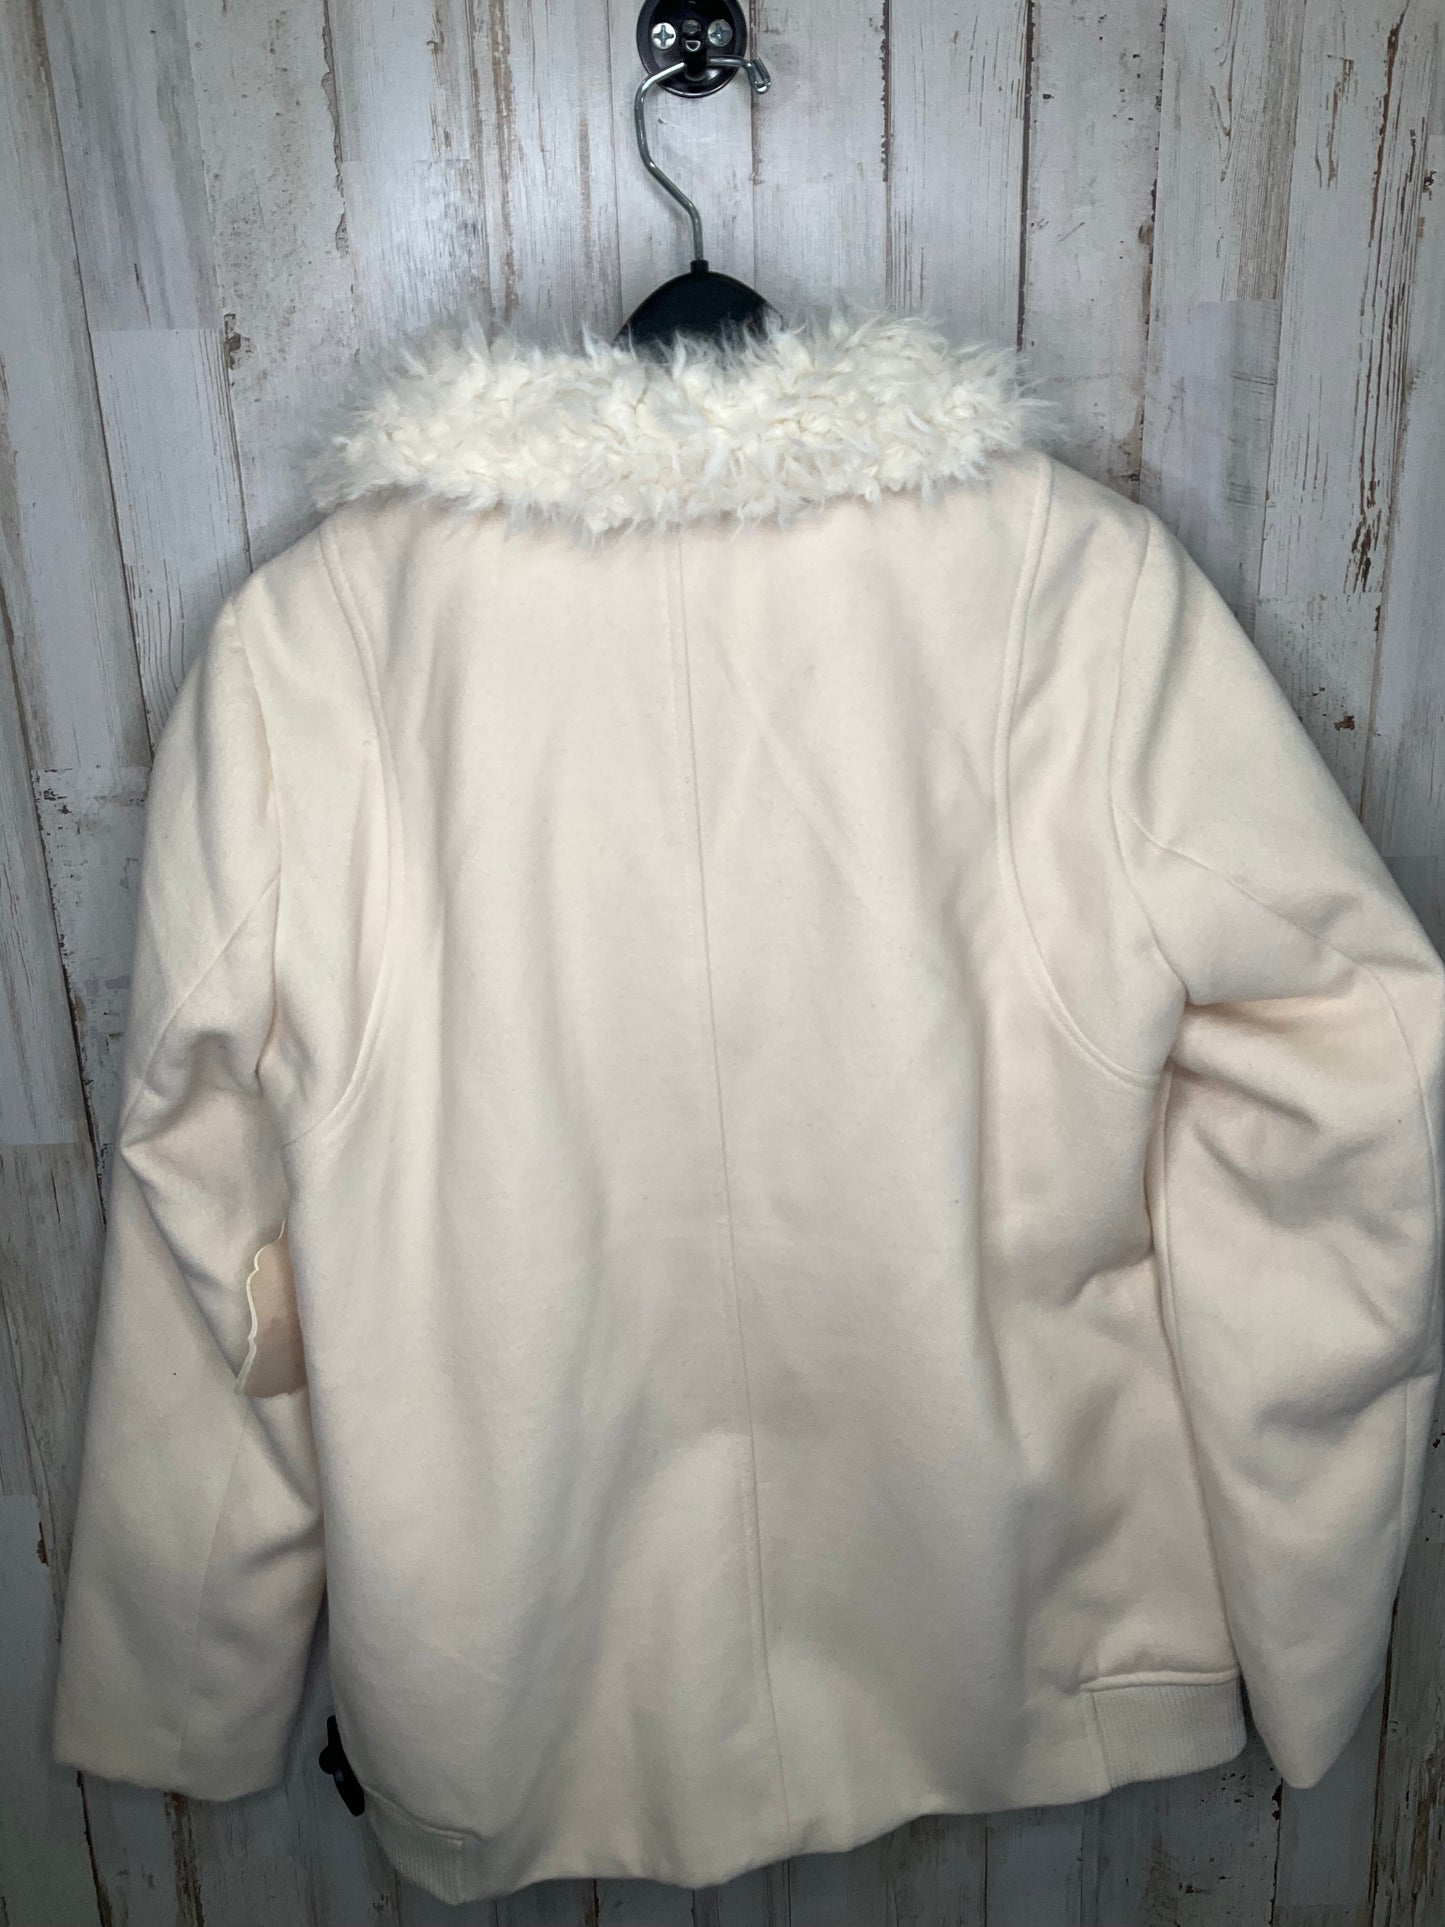 Coat Other By Altard State  Size: L